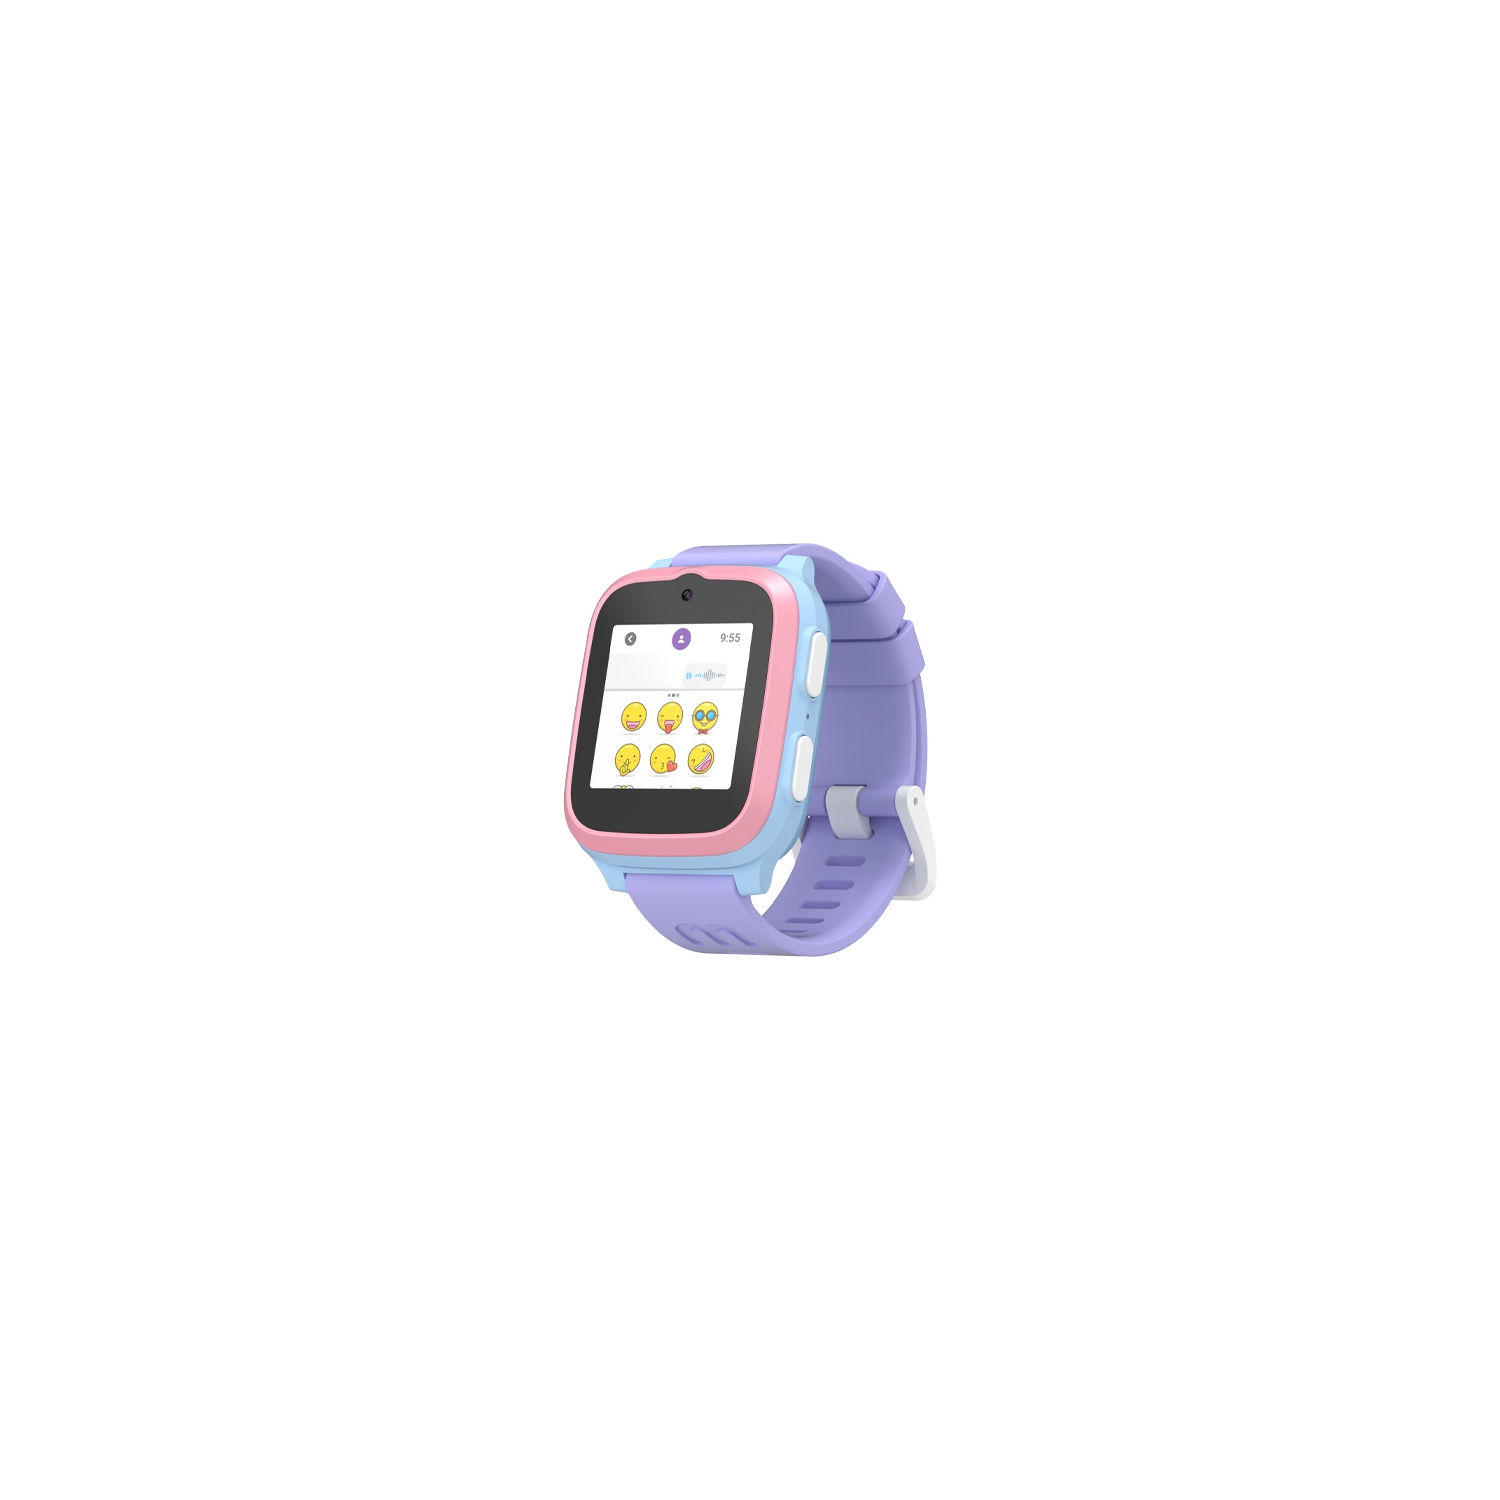 myFirst Fone S3 - 4G Kids Smart Watch Phone GPS Tracker, HD Video Call Voice Messaging Heart Rate - Cotton Candy